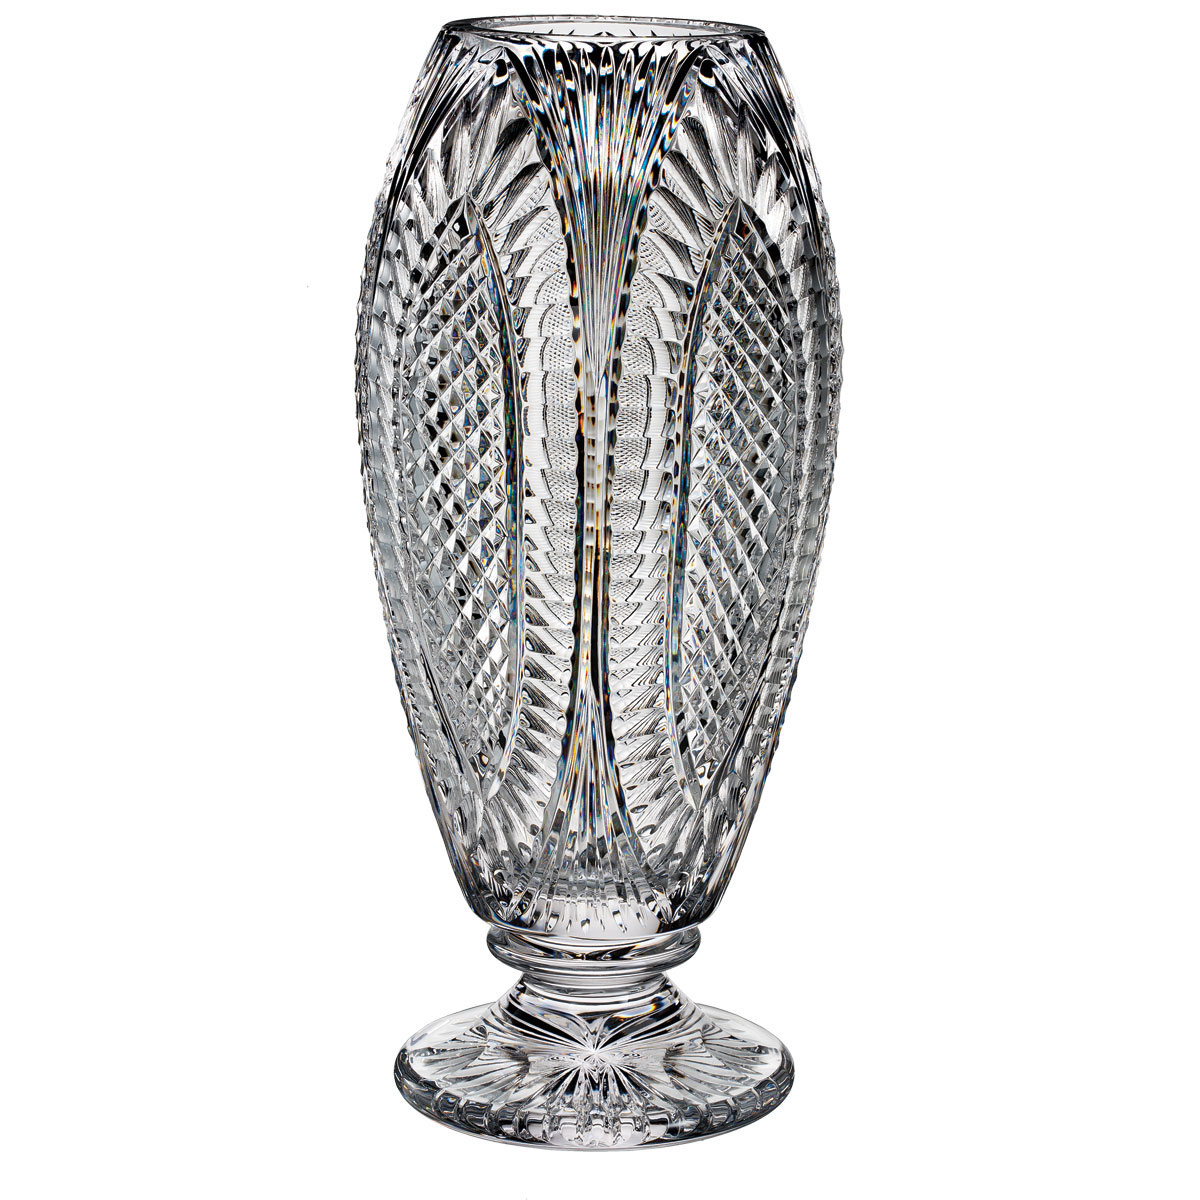 Waterford Crystal, House of Waterford Reflections 16" Crystal Vase, Limited Edition of 100